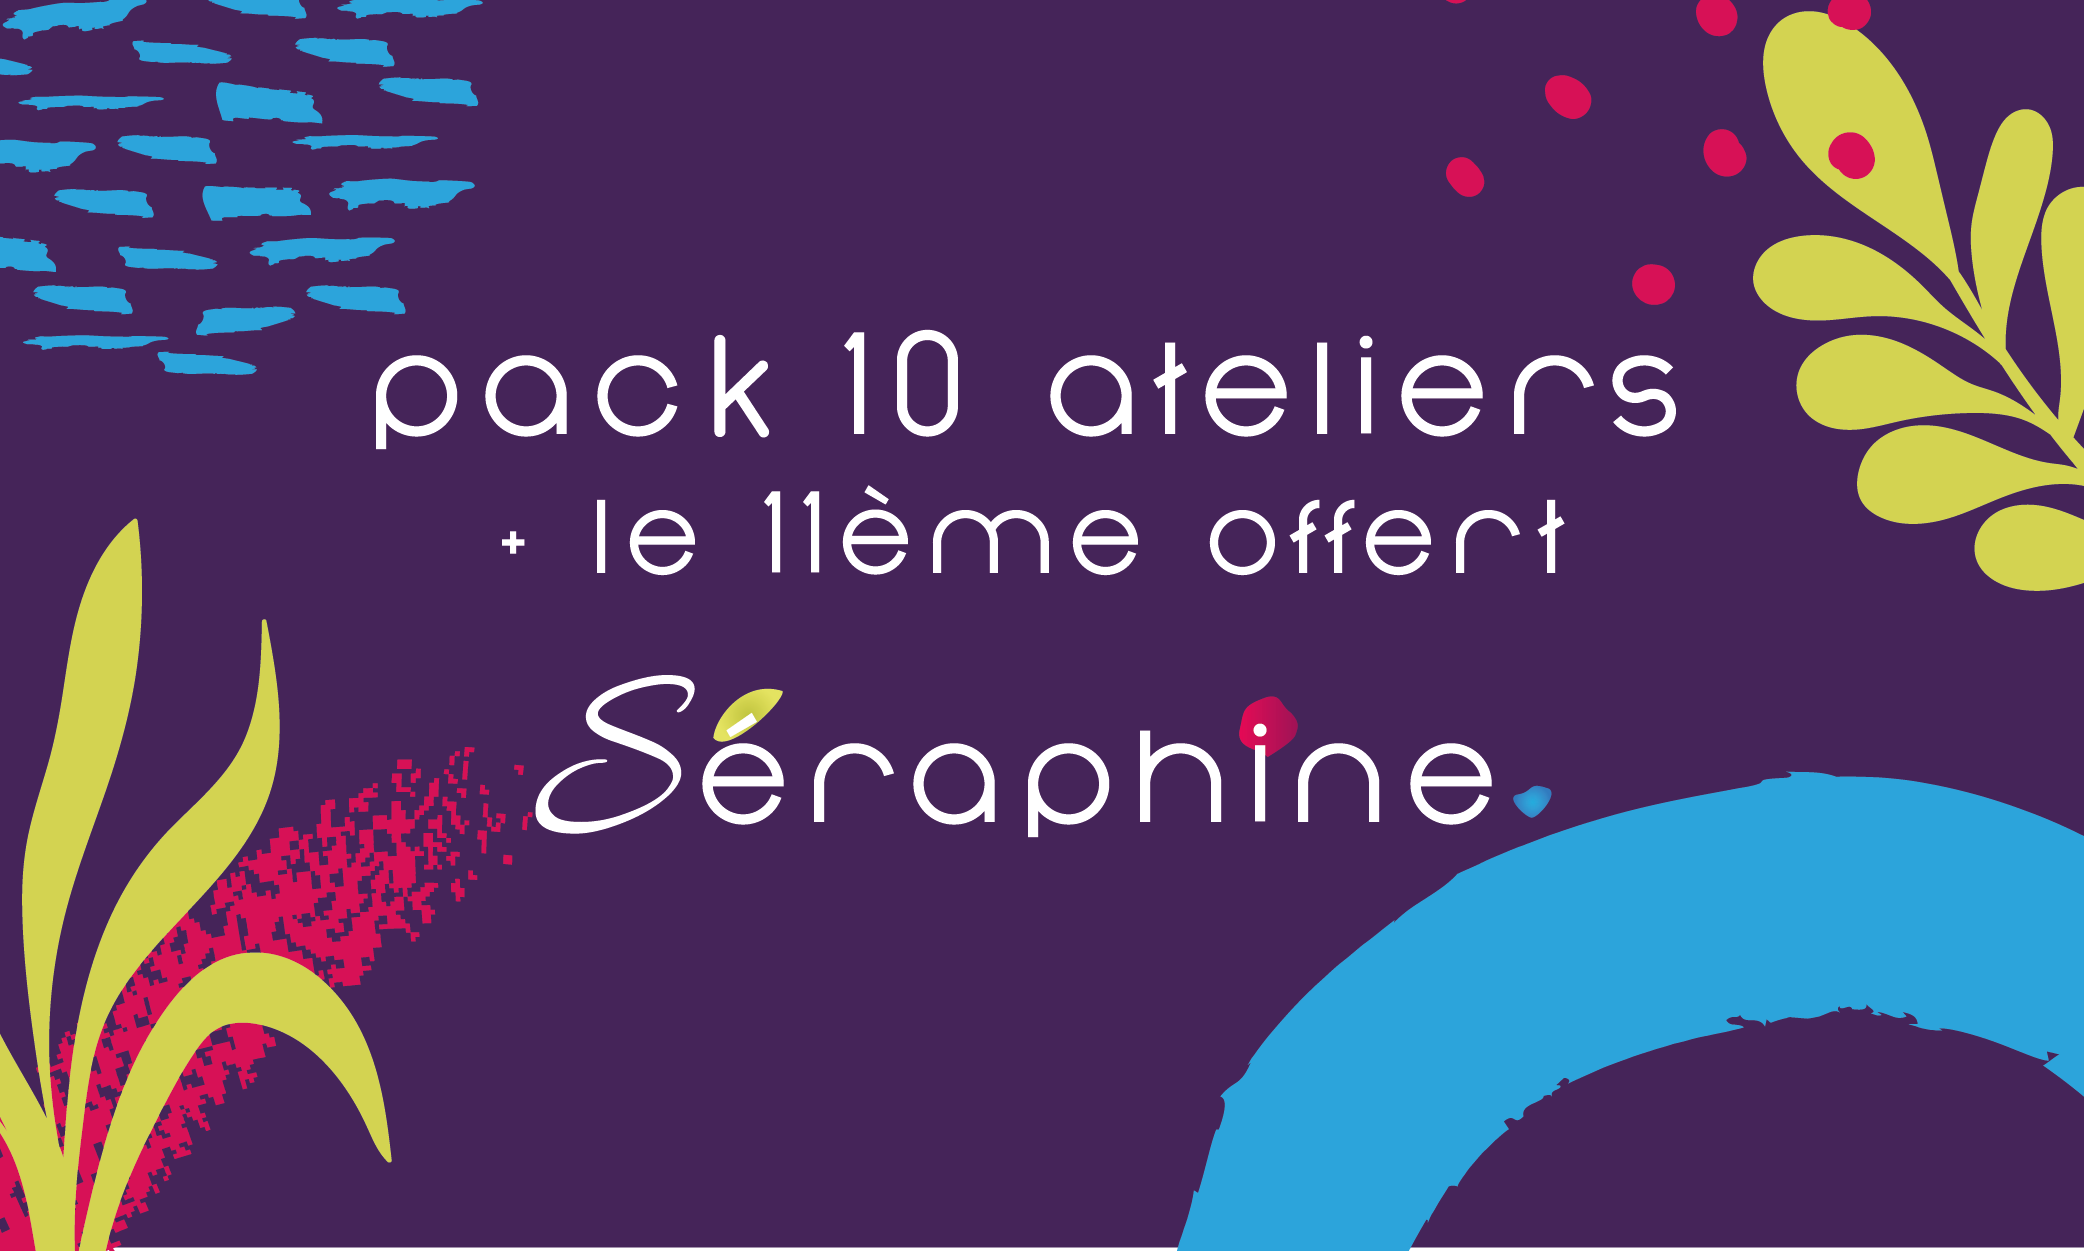 10 ateliers + le 11e offert seraphine ateliers angers